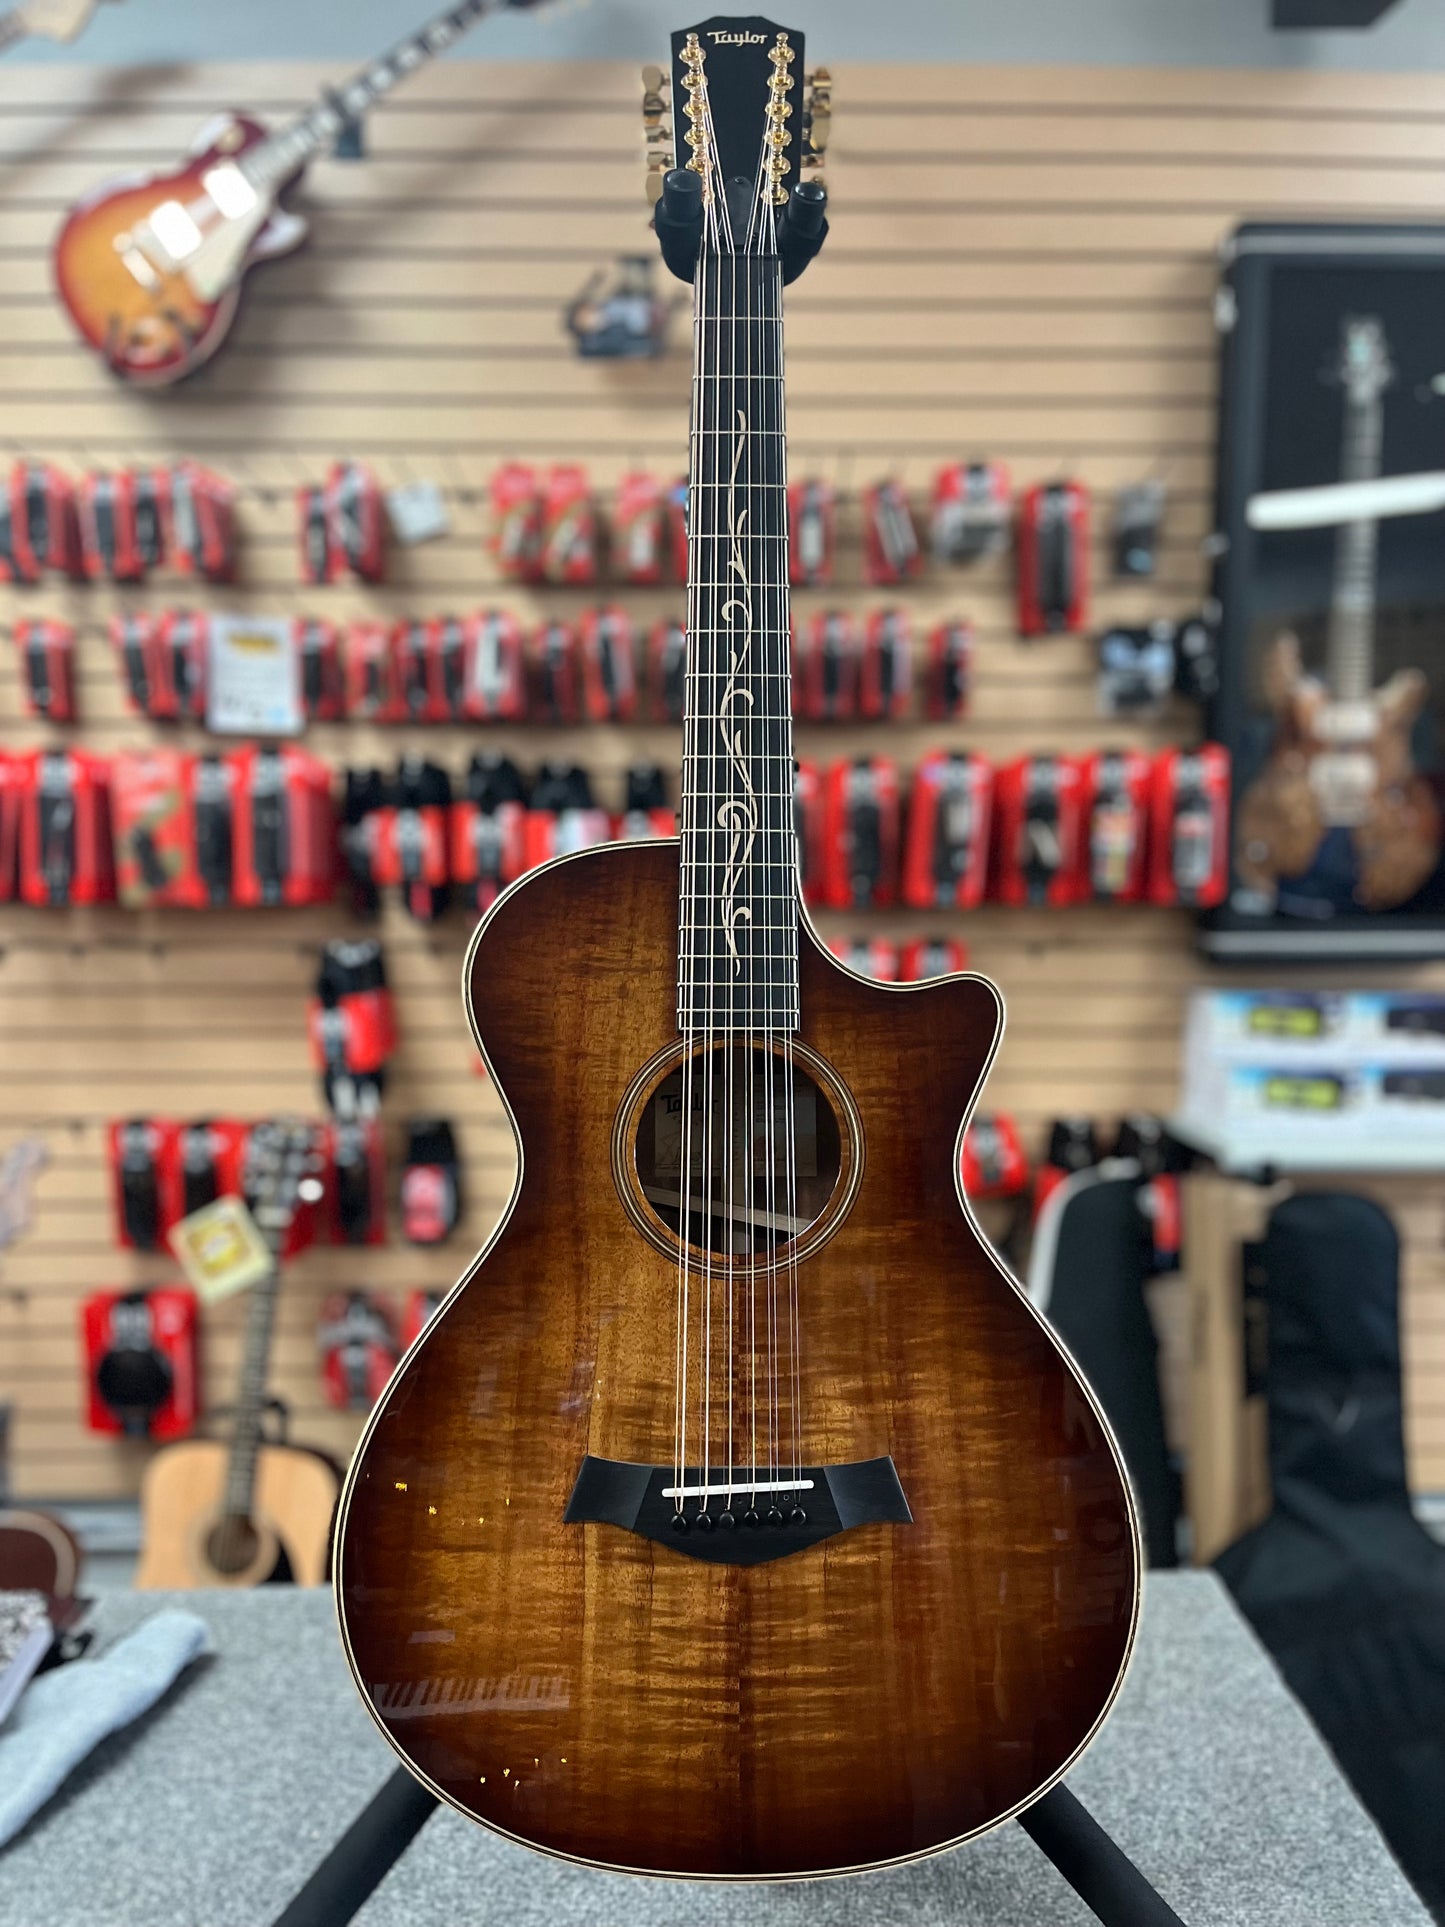 Taylor K62ce Limited Edition 12-String 12-Fret Grand Concert Acoustic Guitar - Shaded Edge Burst